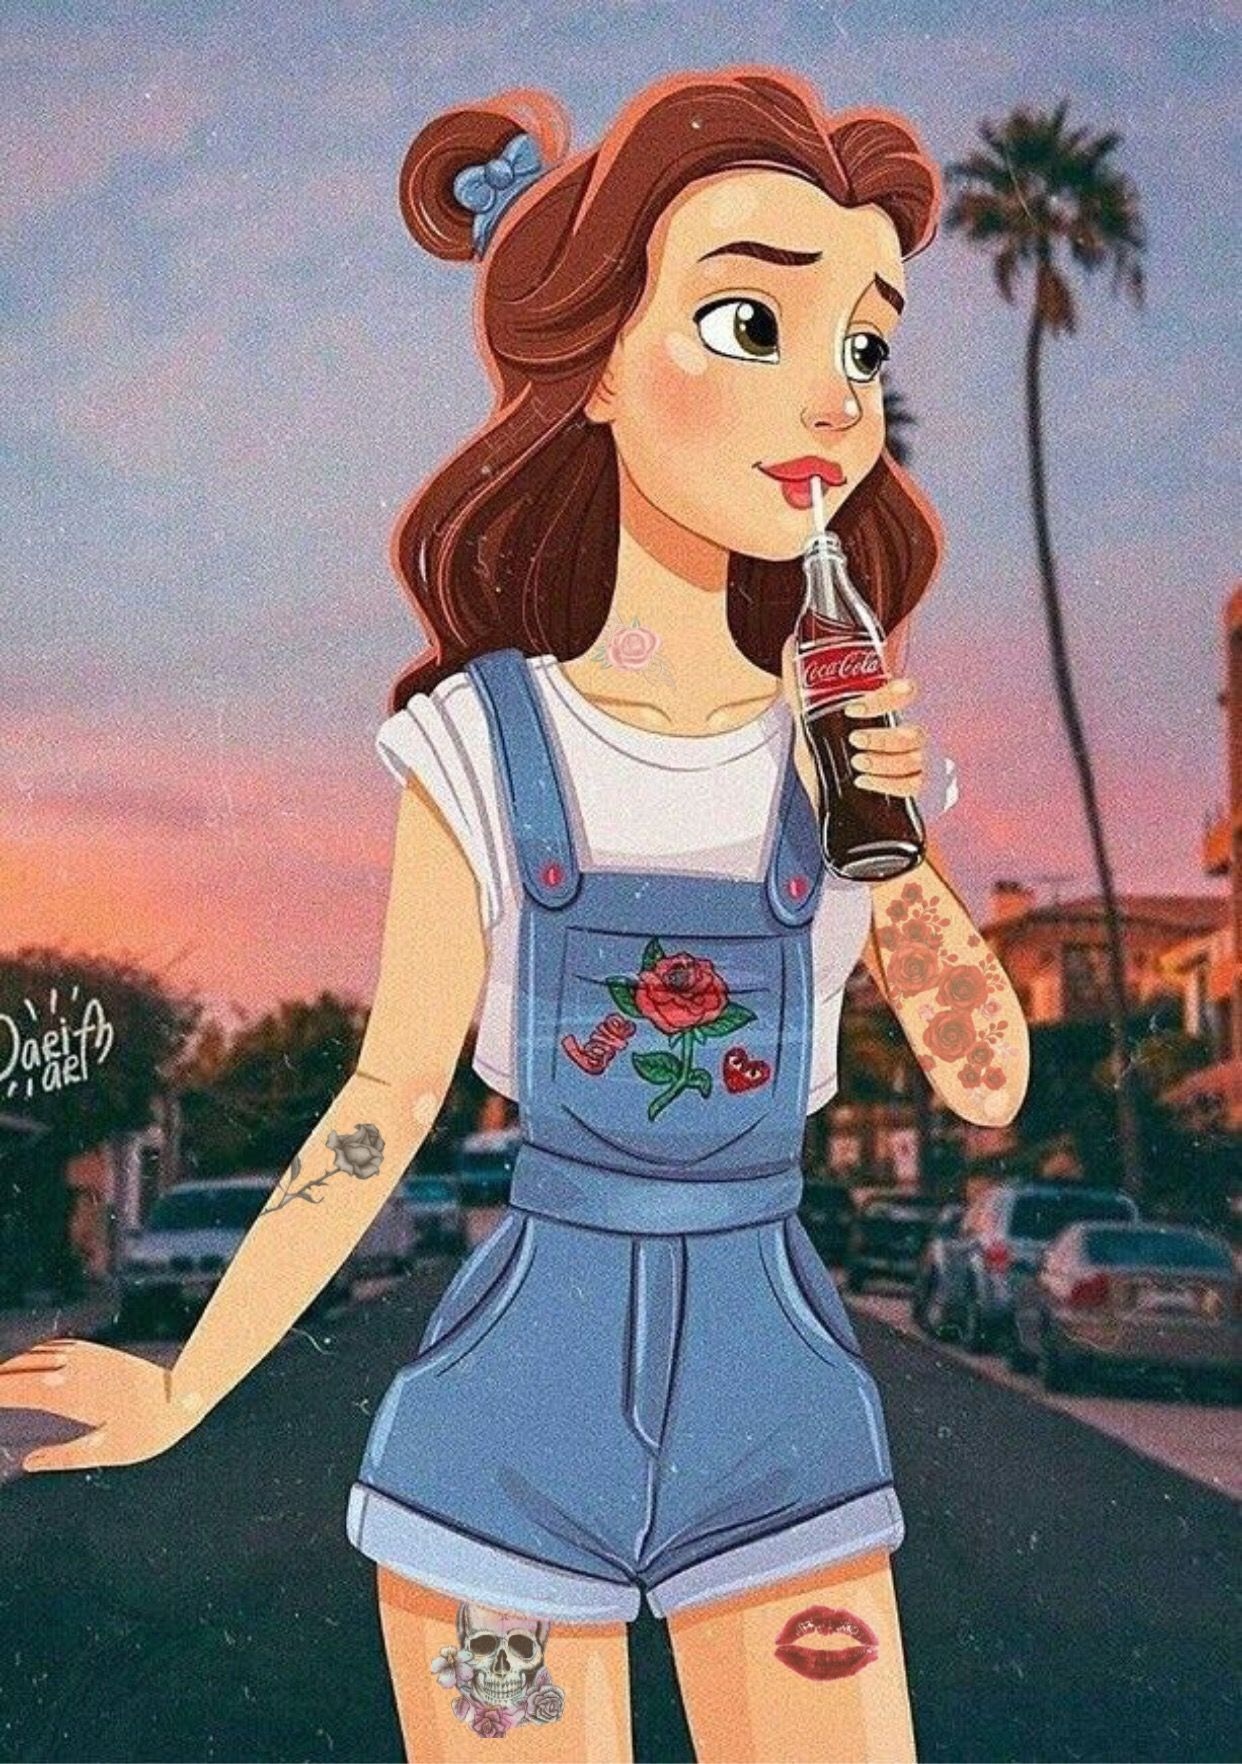 A Disney cartoon character with tattoos holding a coke - Belle